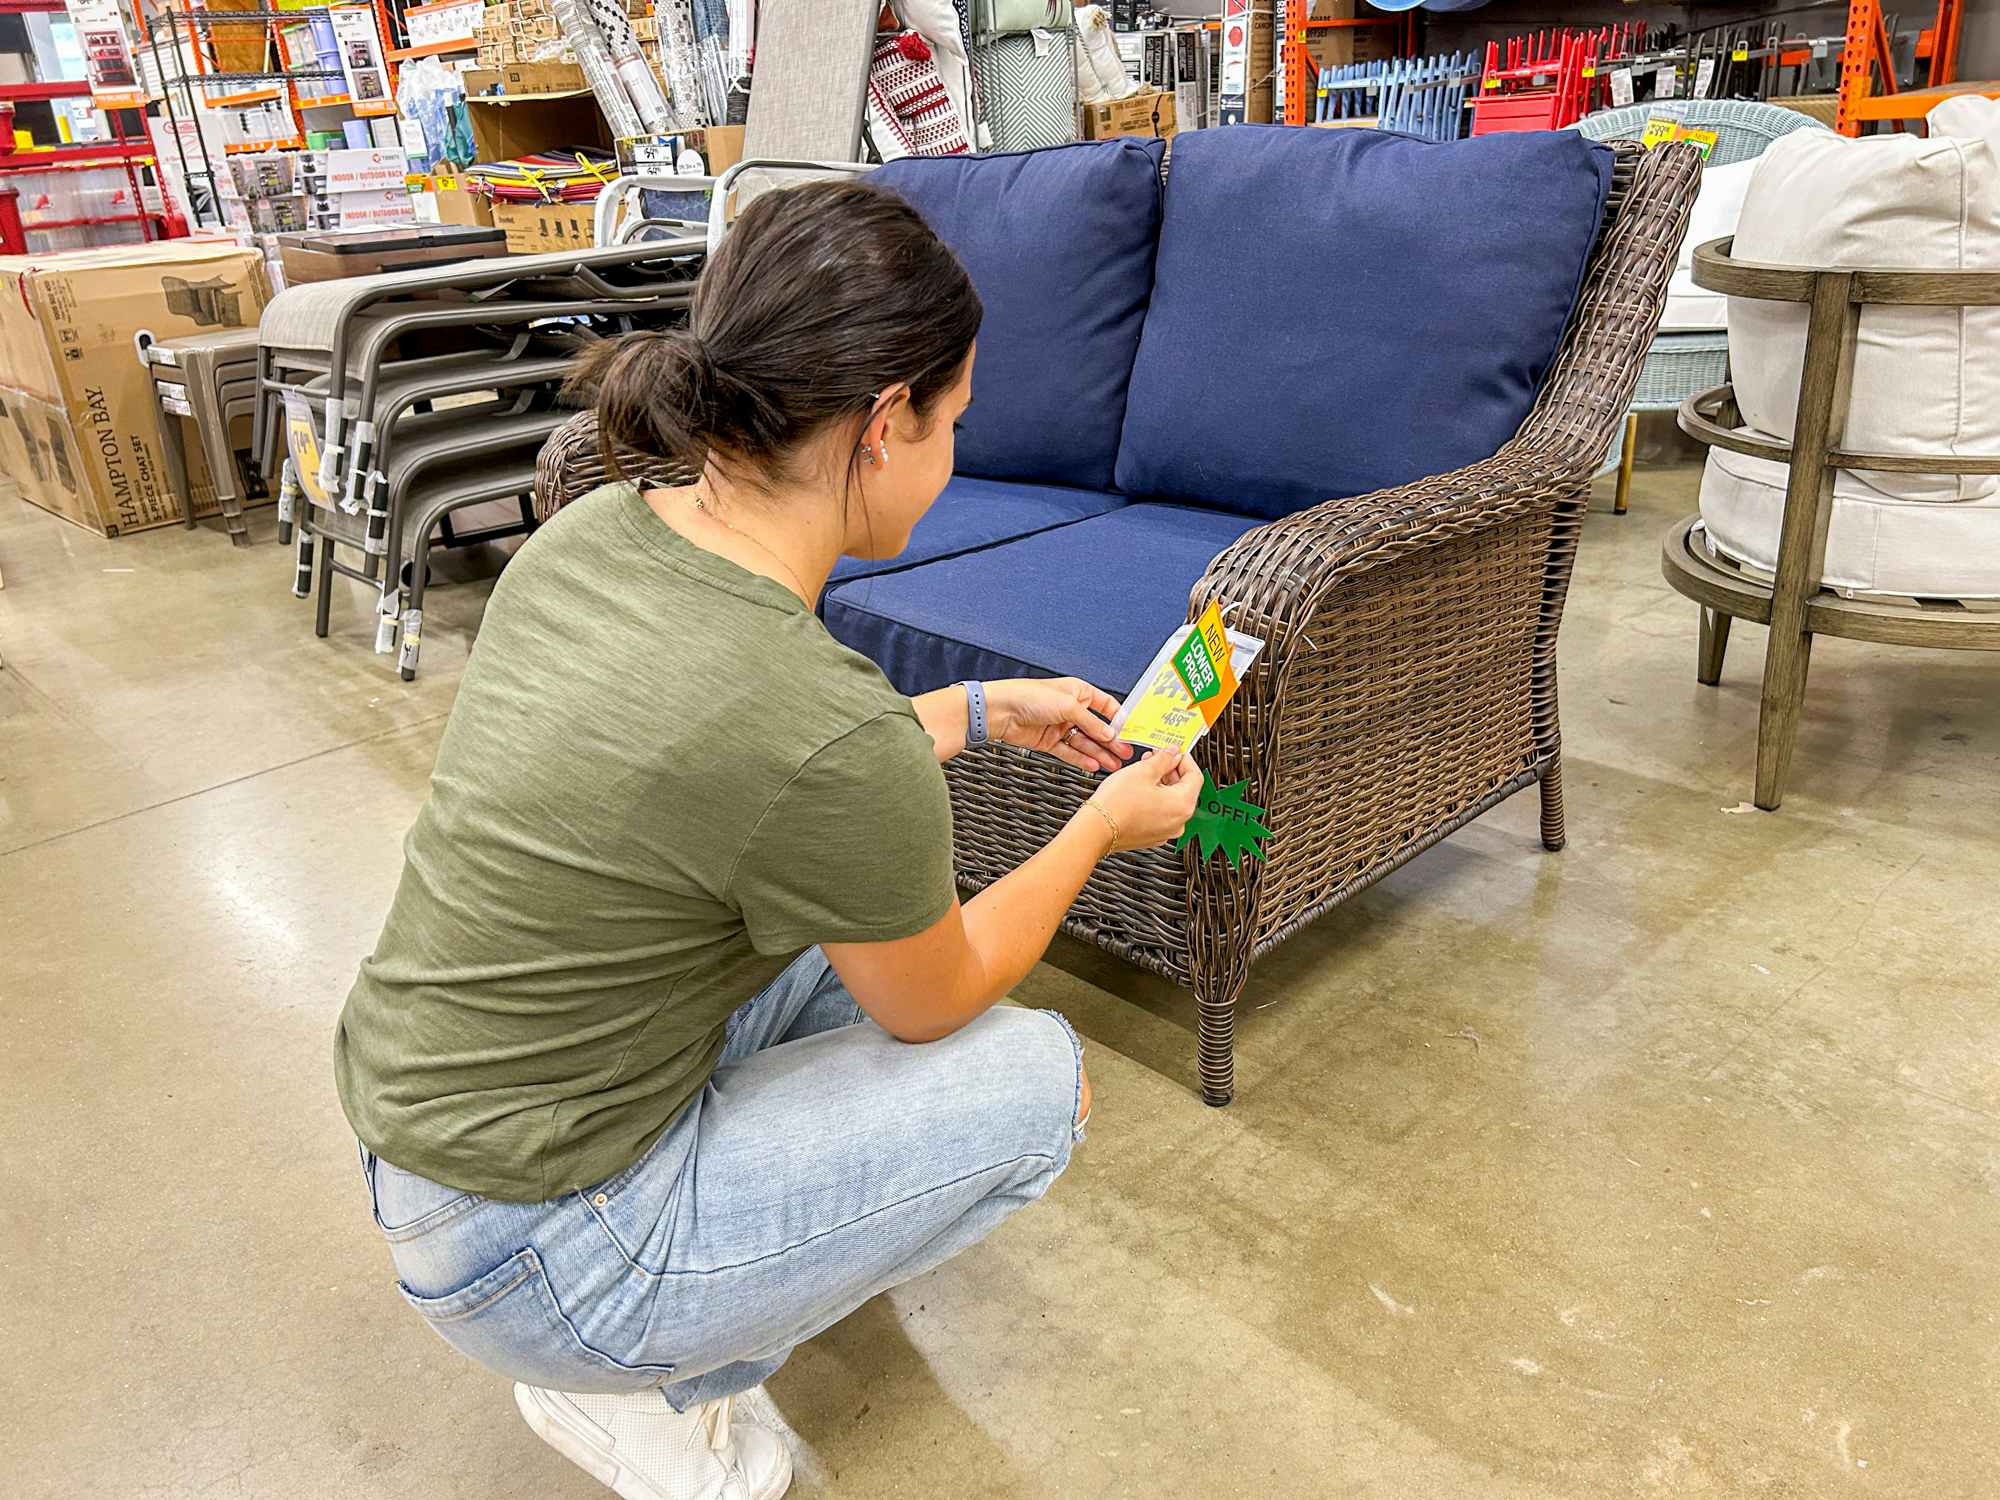 Home-depot-labor-day-sale-patio-furniture-model-kcl